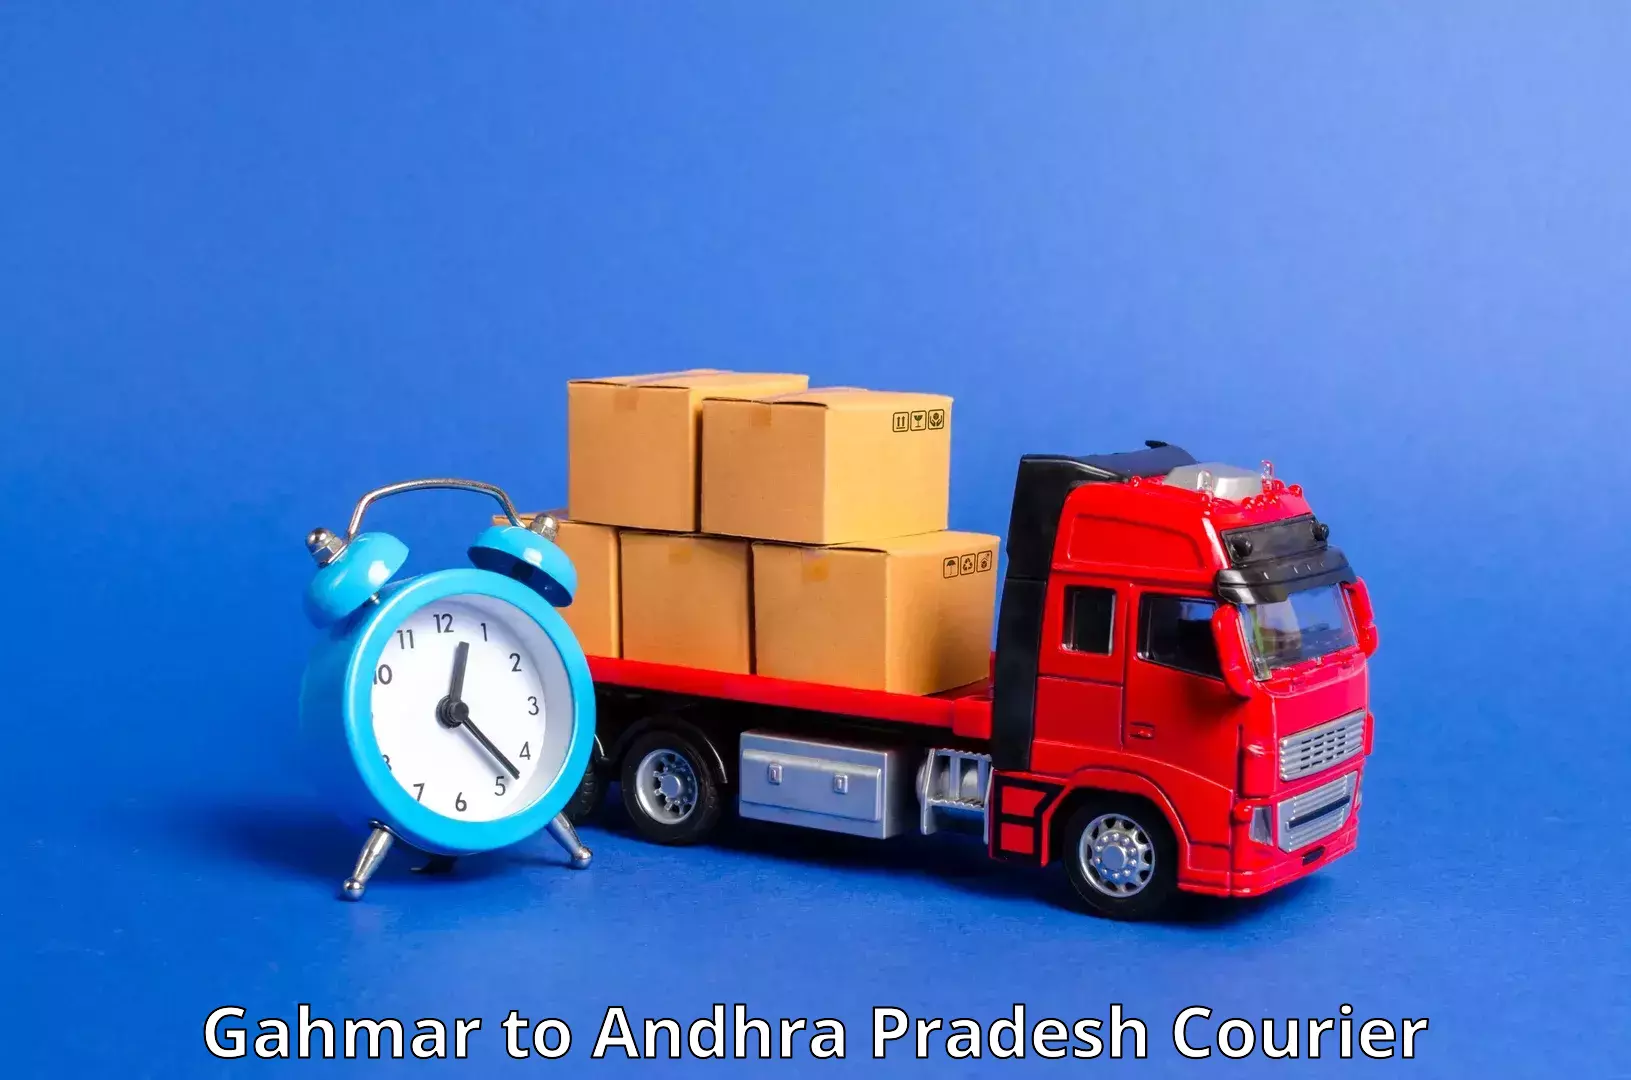 Nationwide delivery network in Gahmar to Mangalagiri